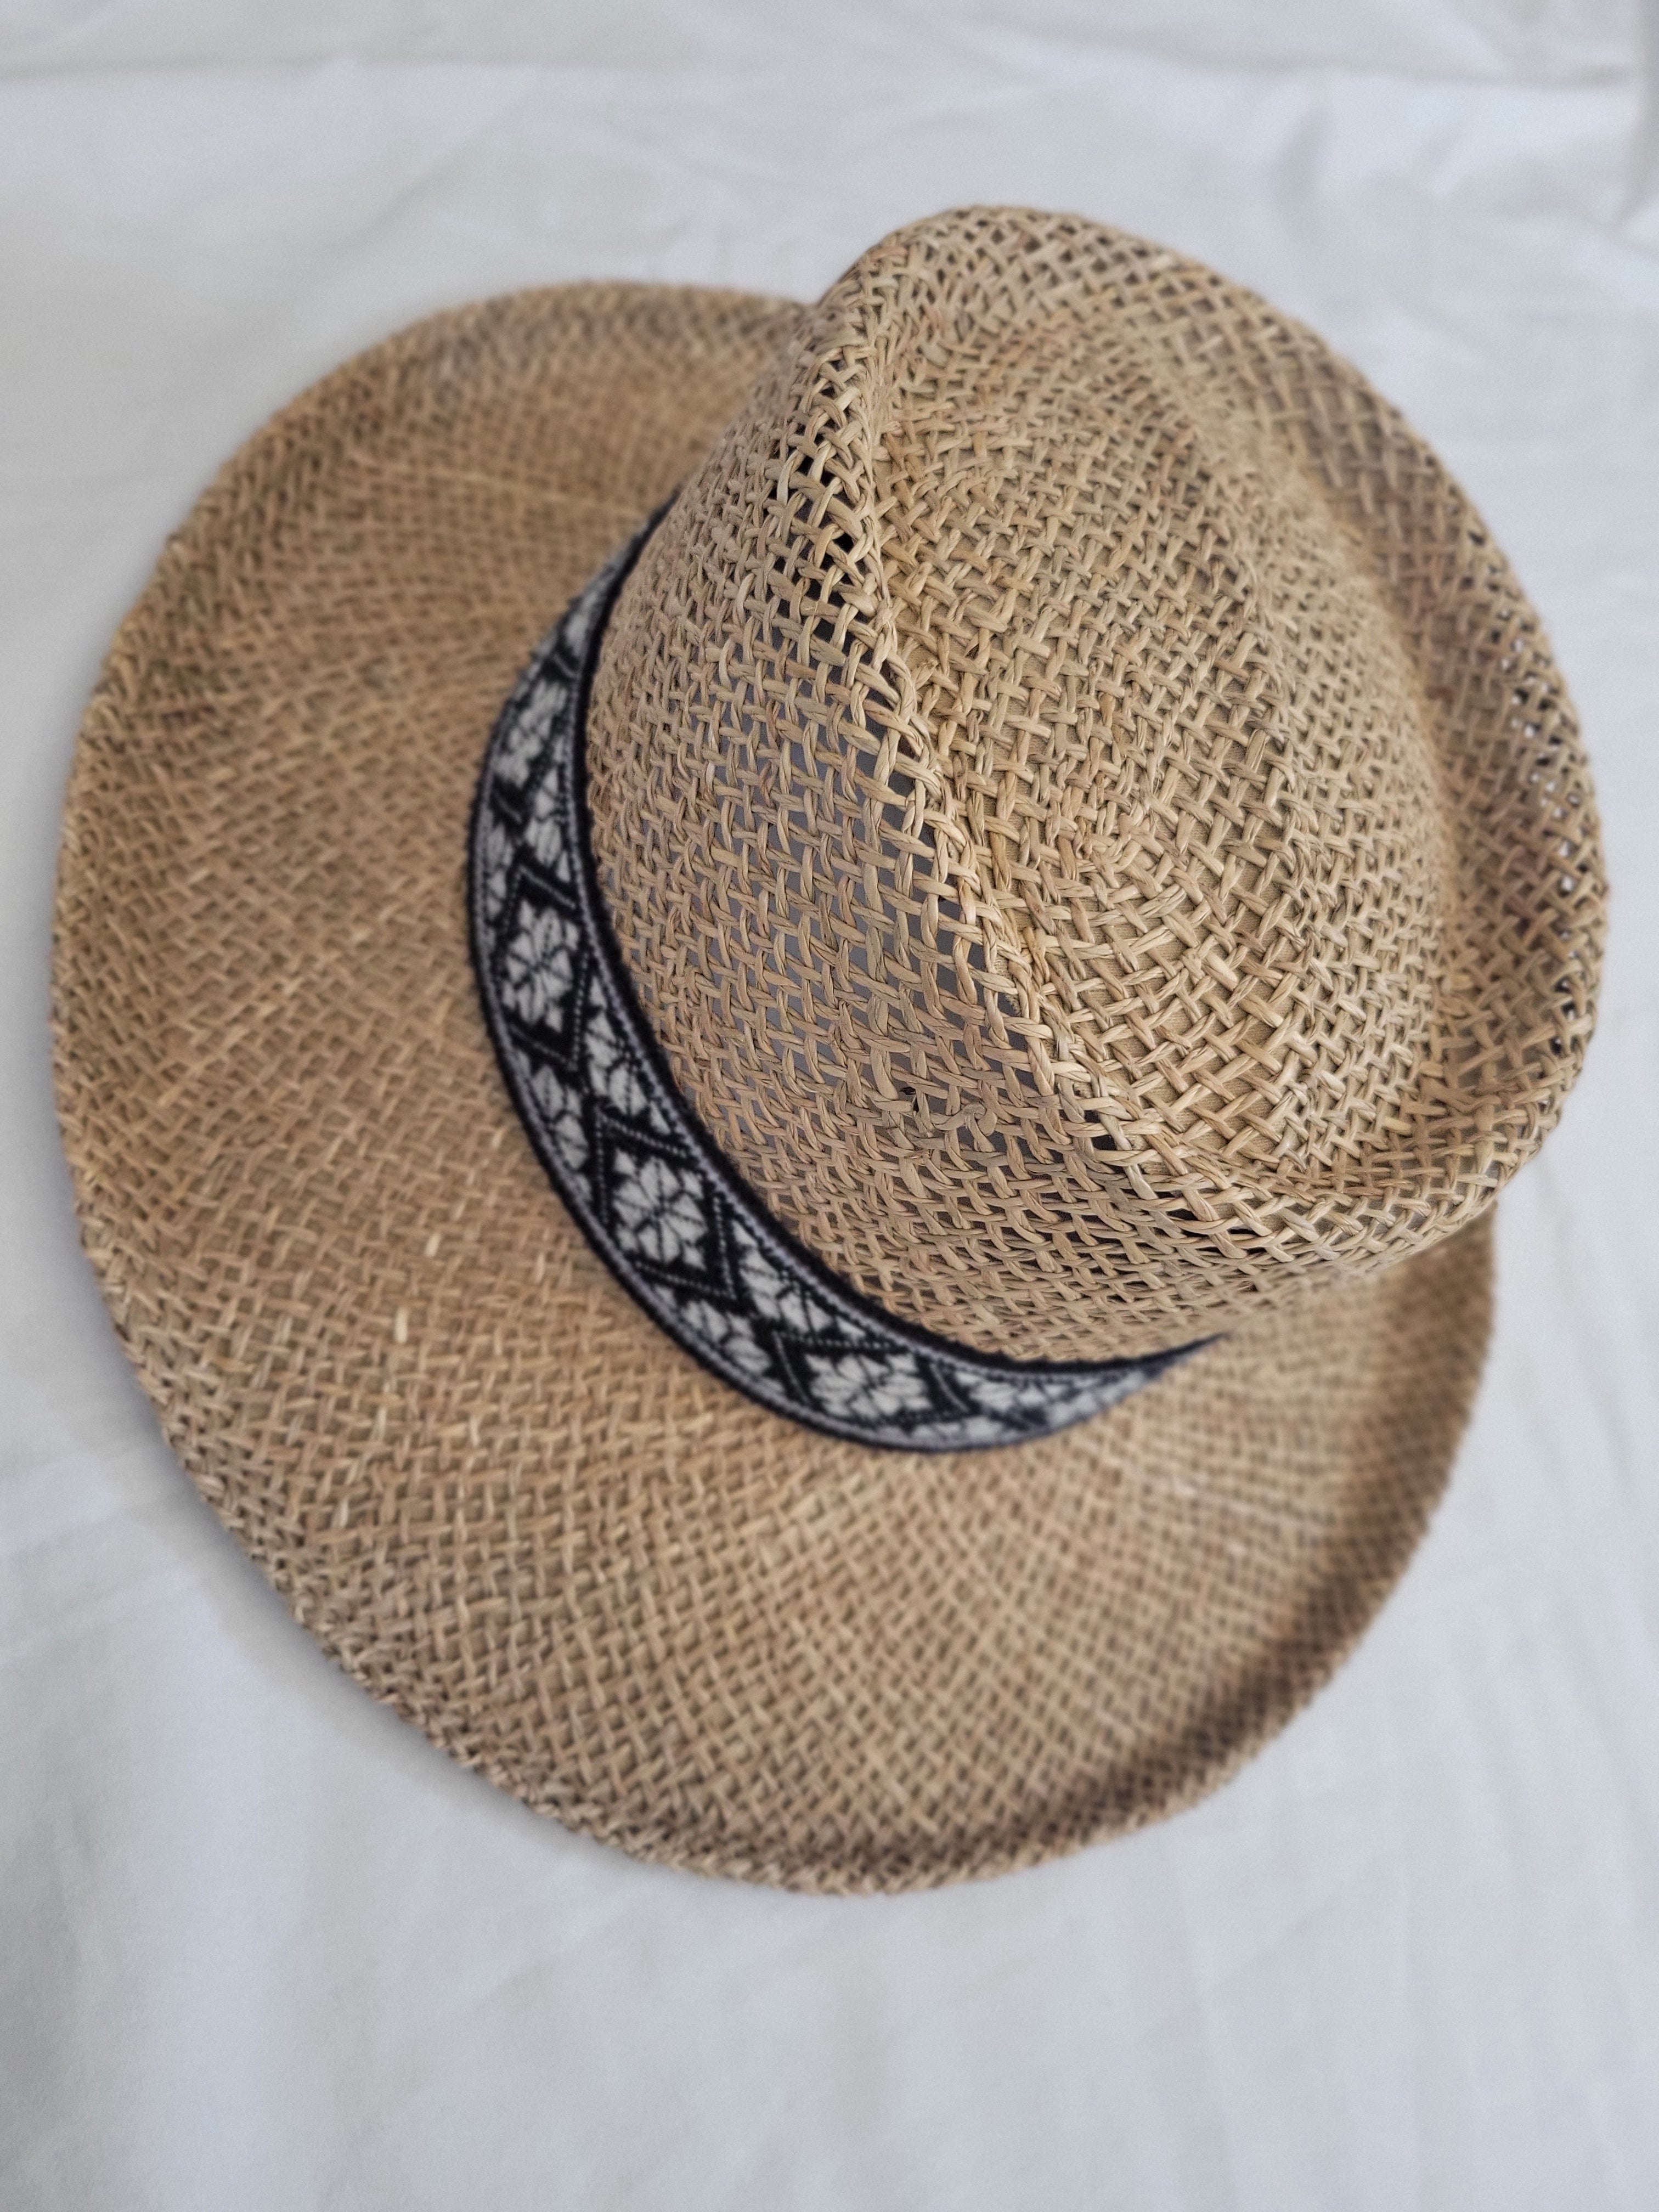 Open weaved seagrass gambler hat with a jacquard band detail